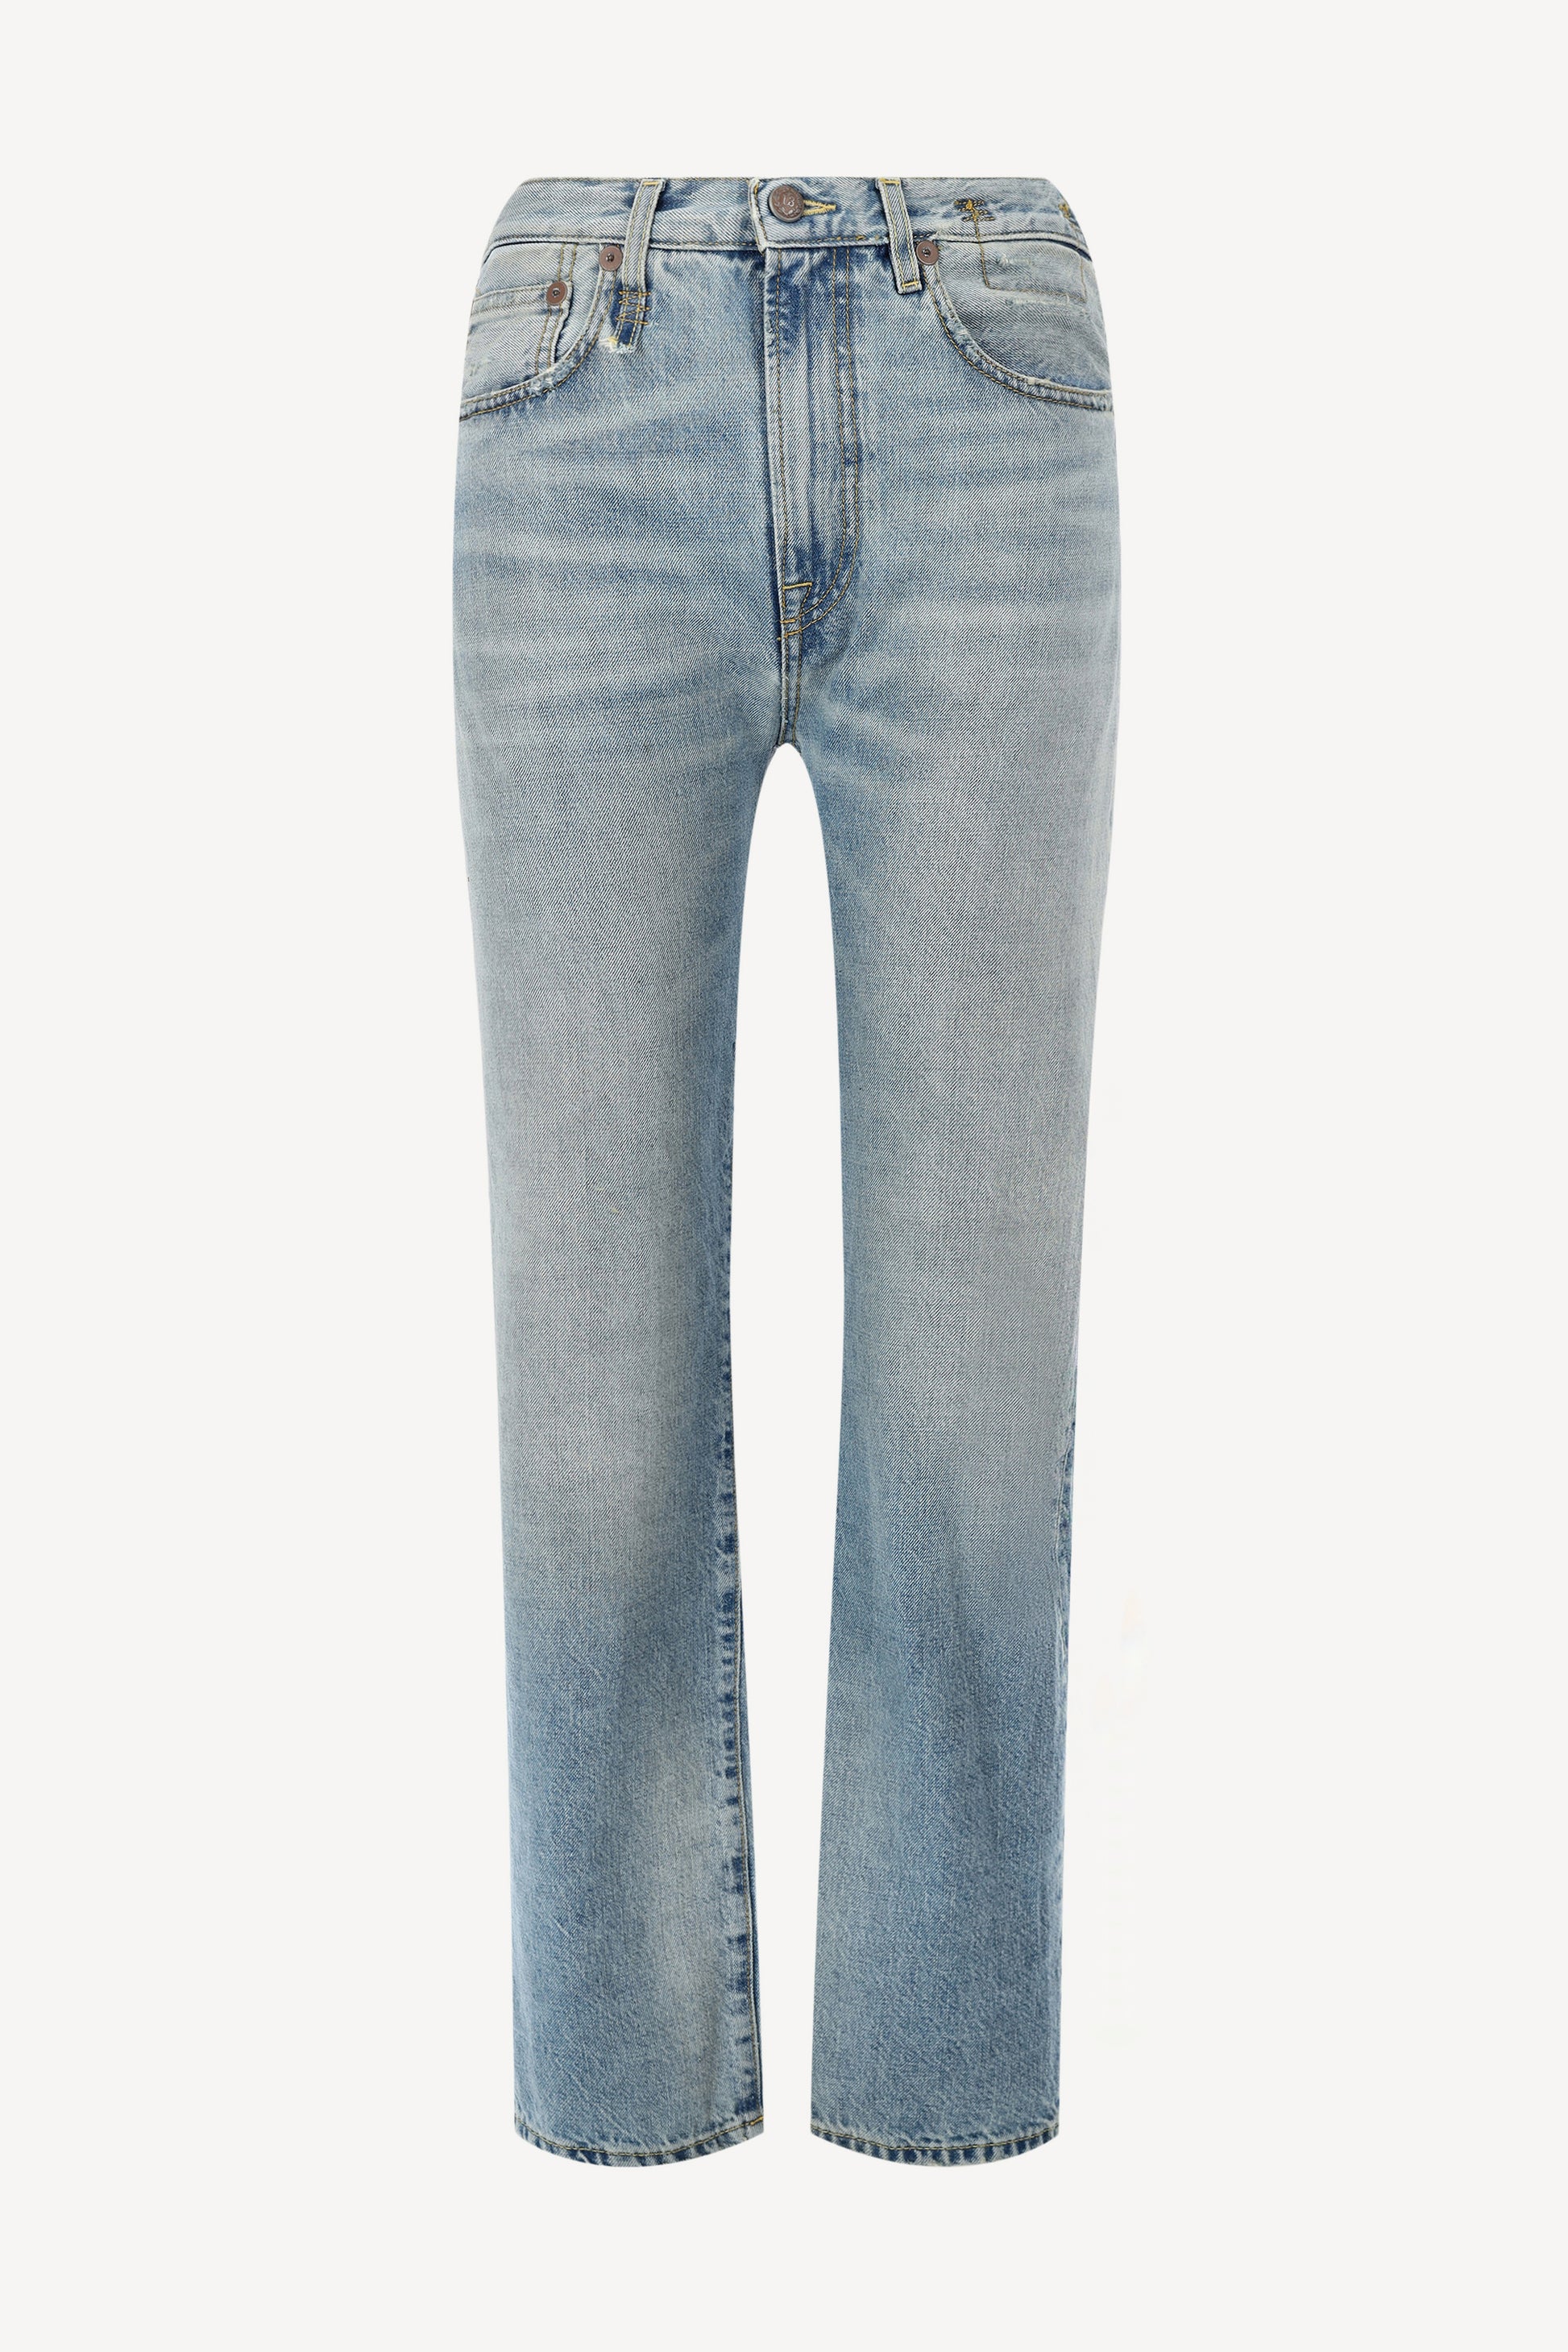 Jeans Courtney Slim in Easton BlueR13 - Anita Hass